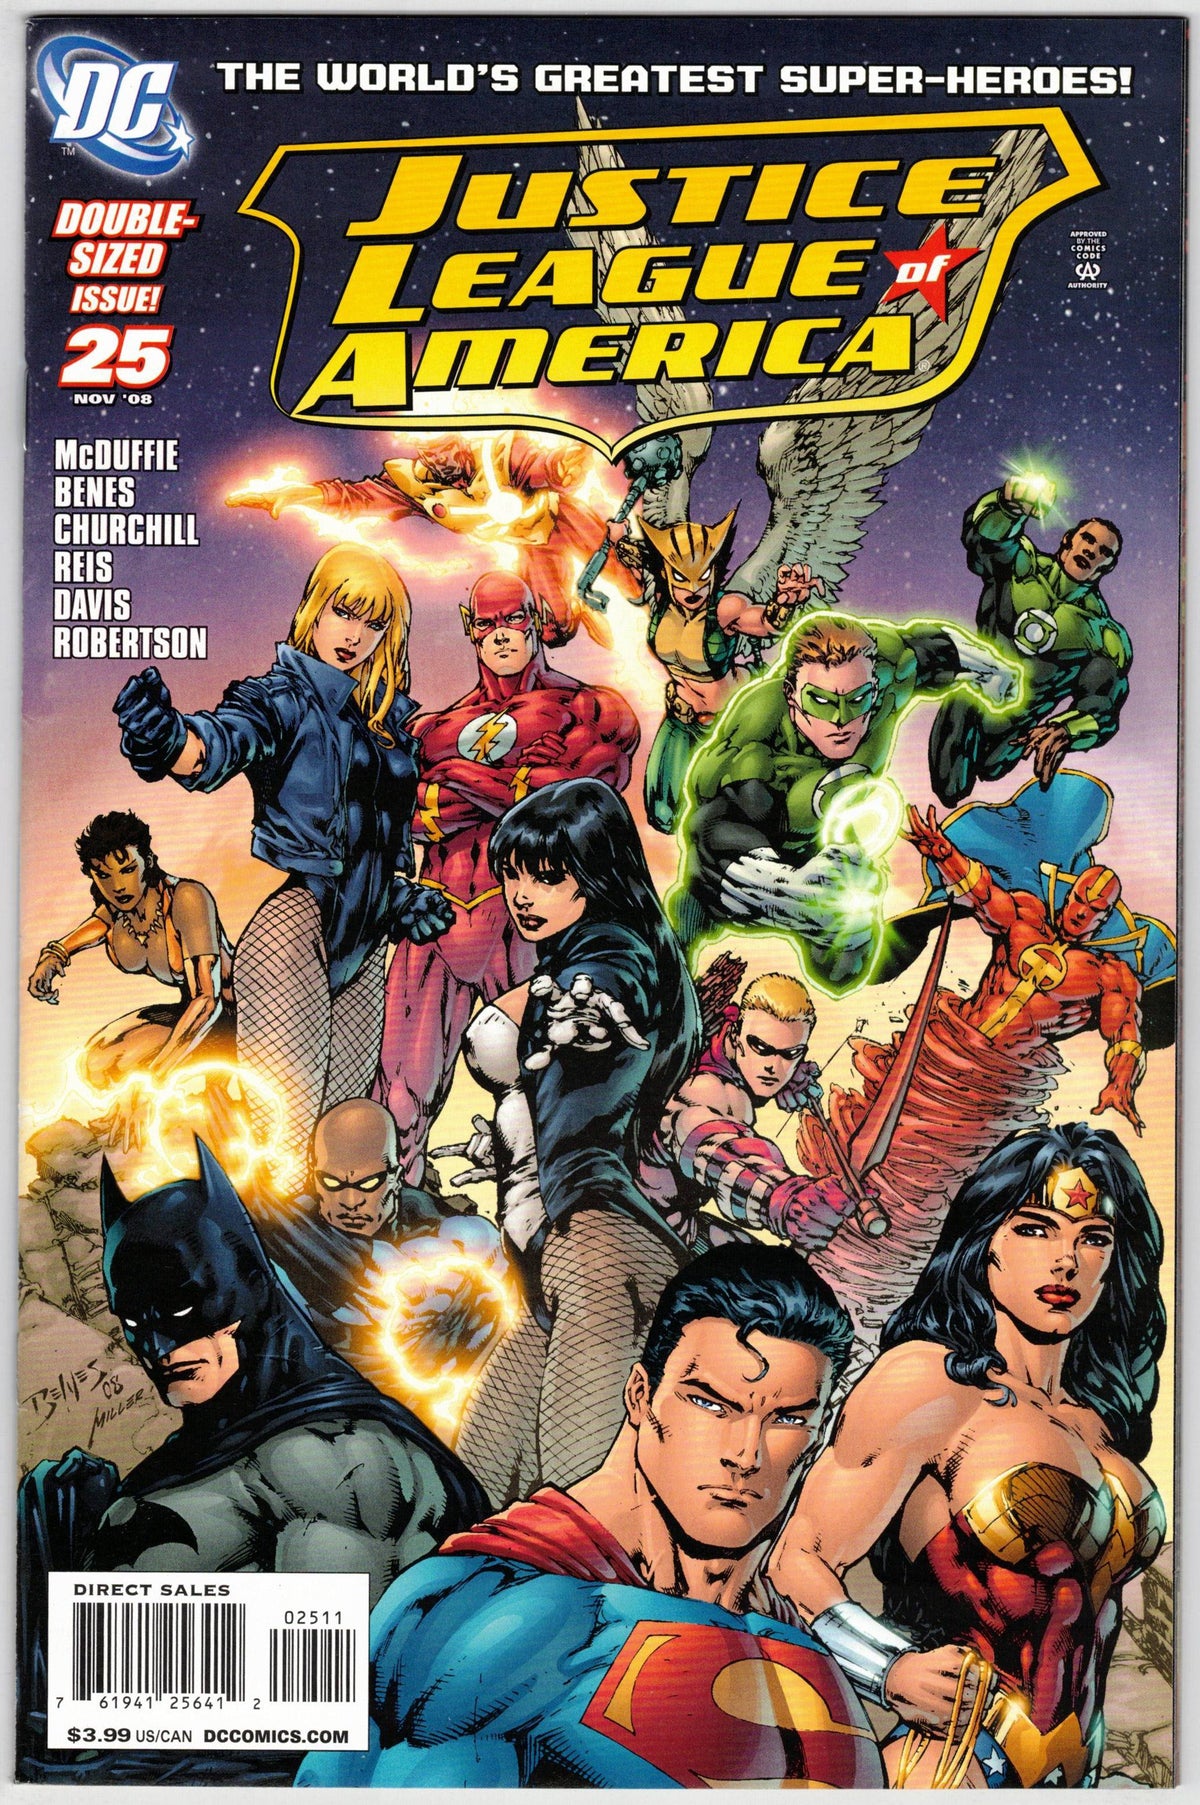 Photo of Justice League of America, Vol. 2 (2008) Issue 25 Comic sold by Stronghold Collectibles